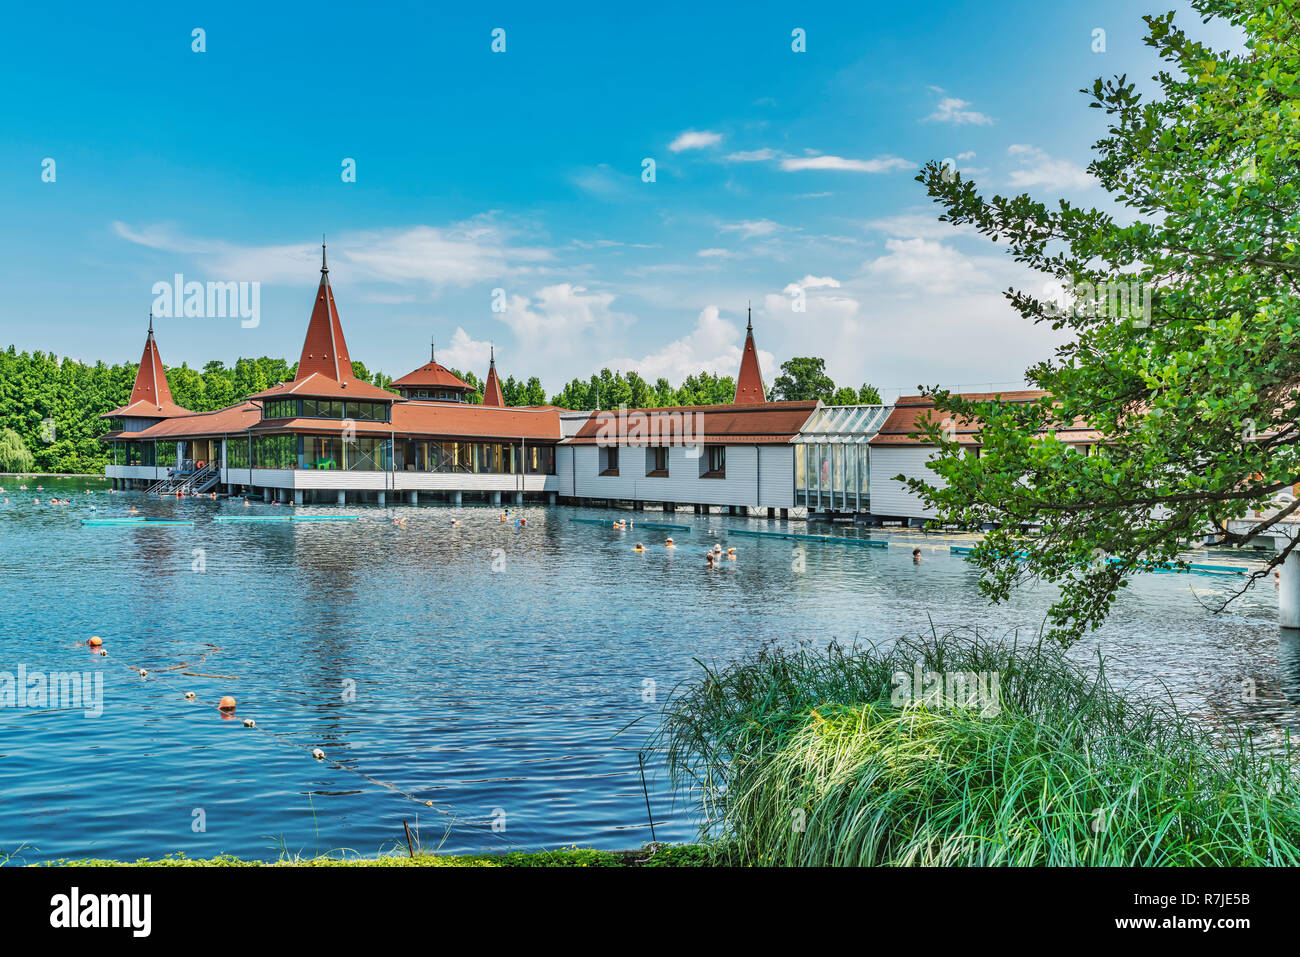 The thermal lake Heviz is the largest natural thermal lake in the world.  Heviz spa, Zala county, Western Transdanubia, Hungary, Europe Stock Photo -  Alamy